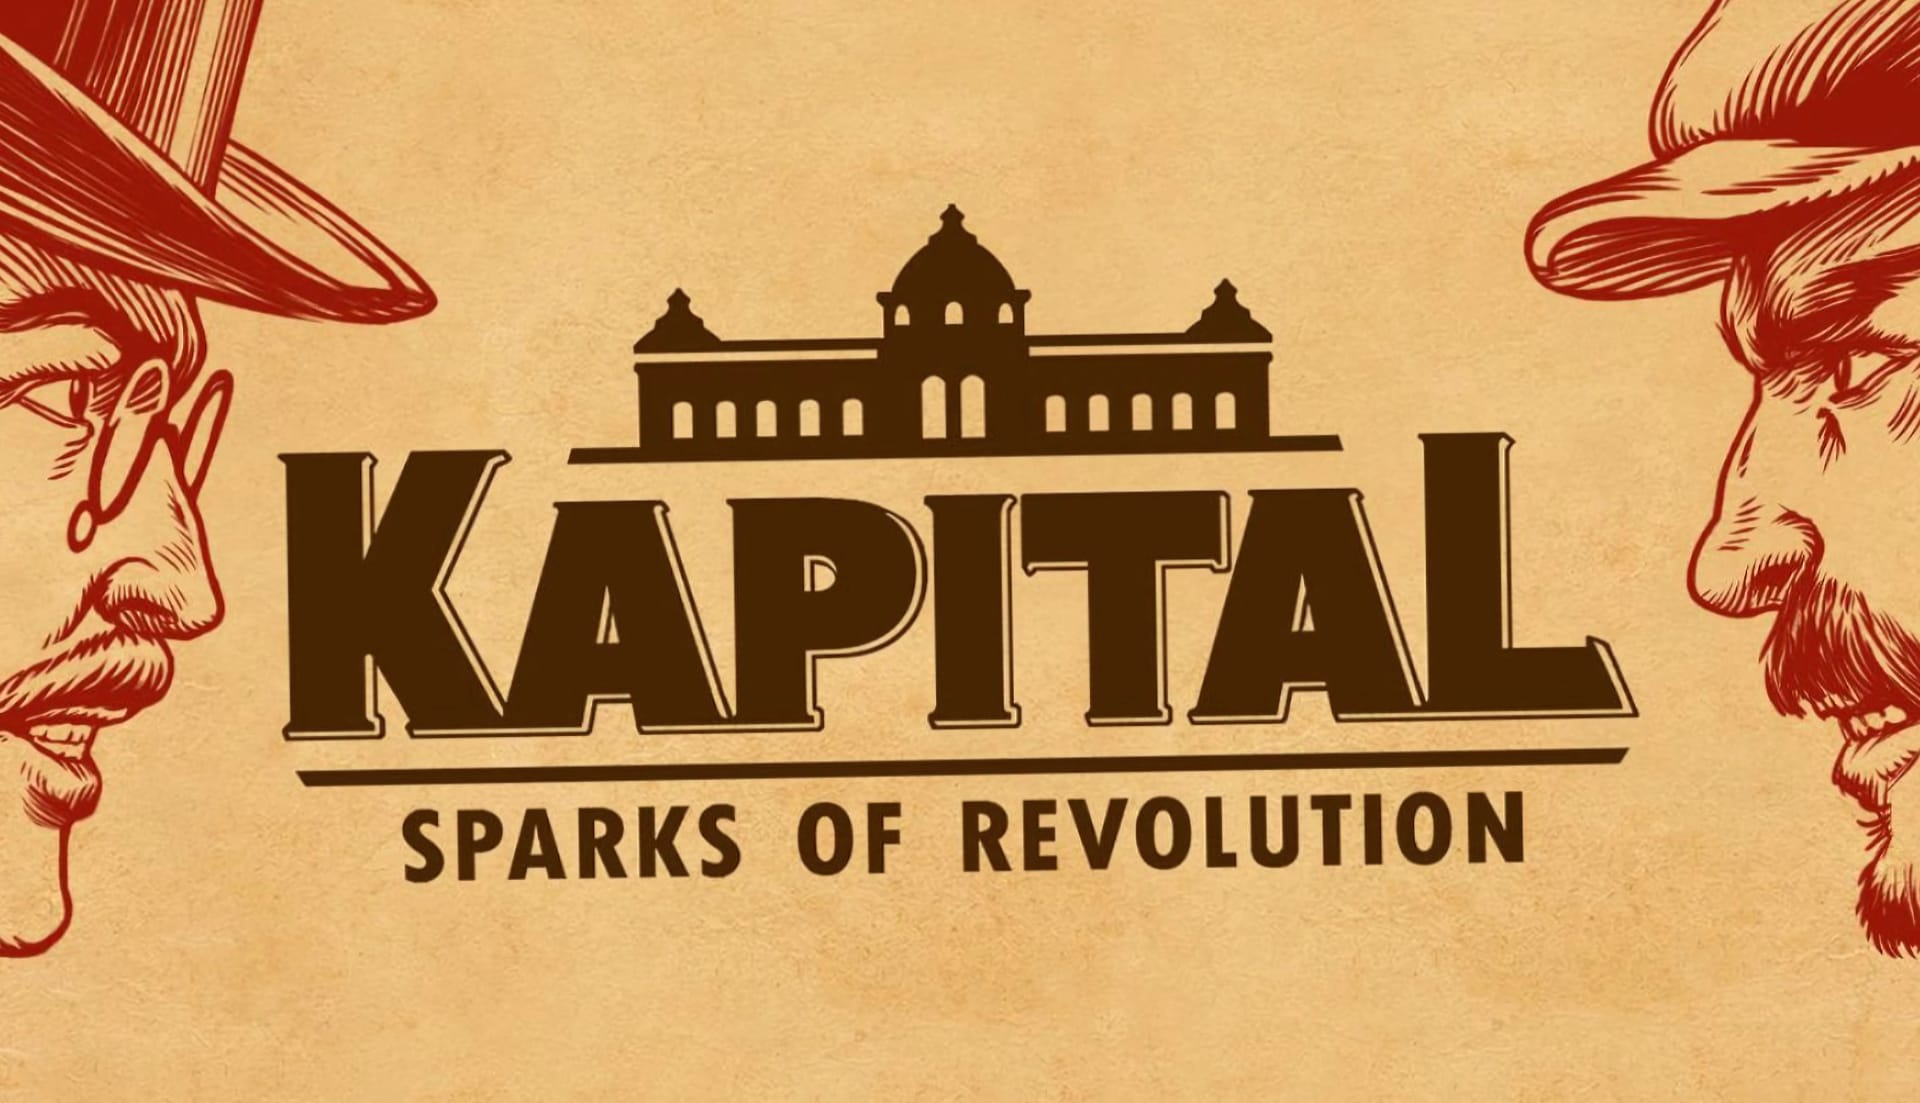 Kapital Sparks of Revolution wallpapers HD quality